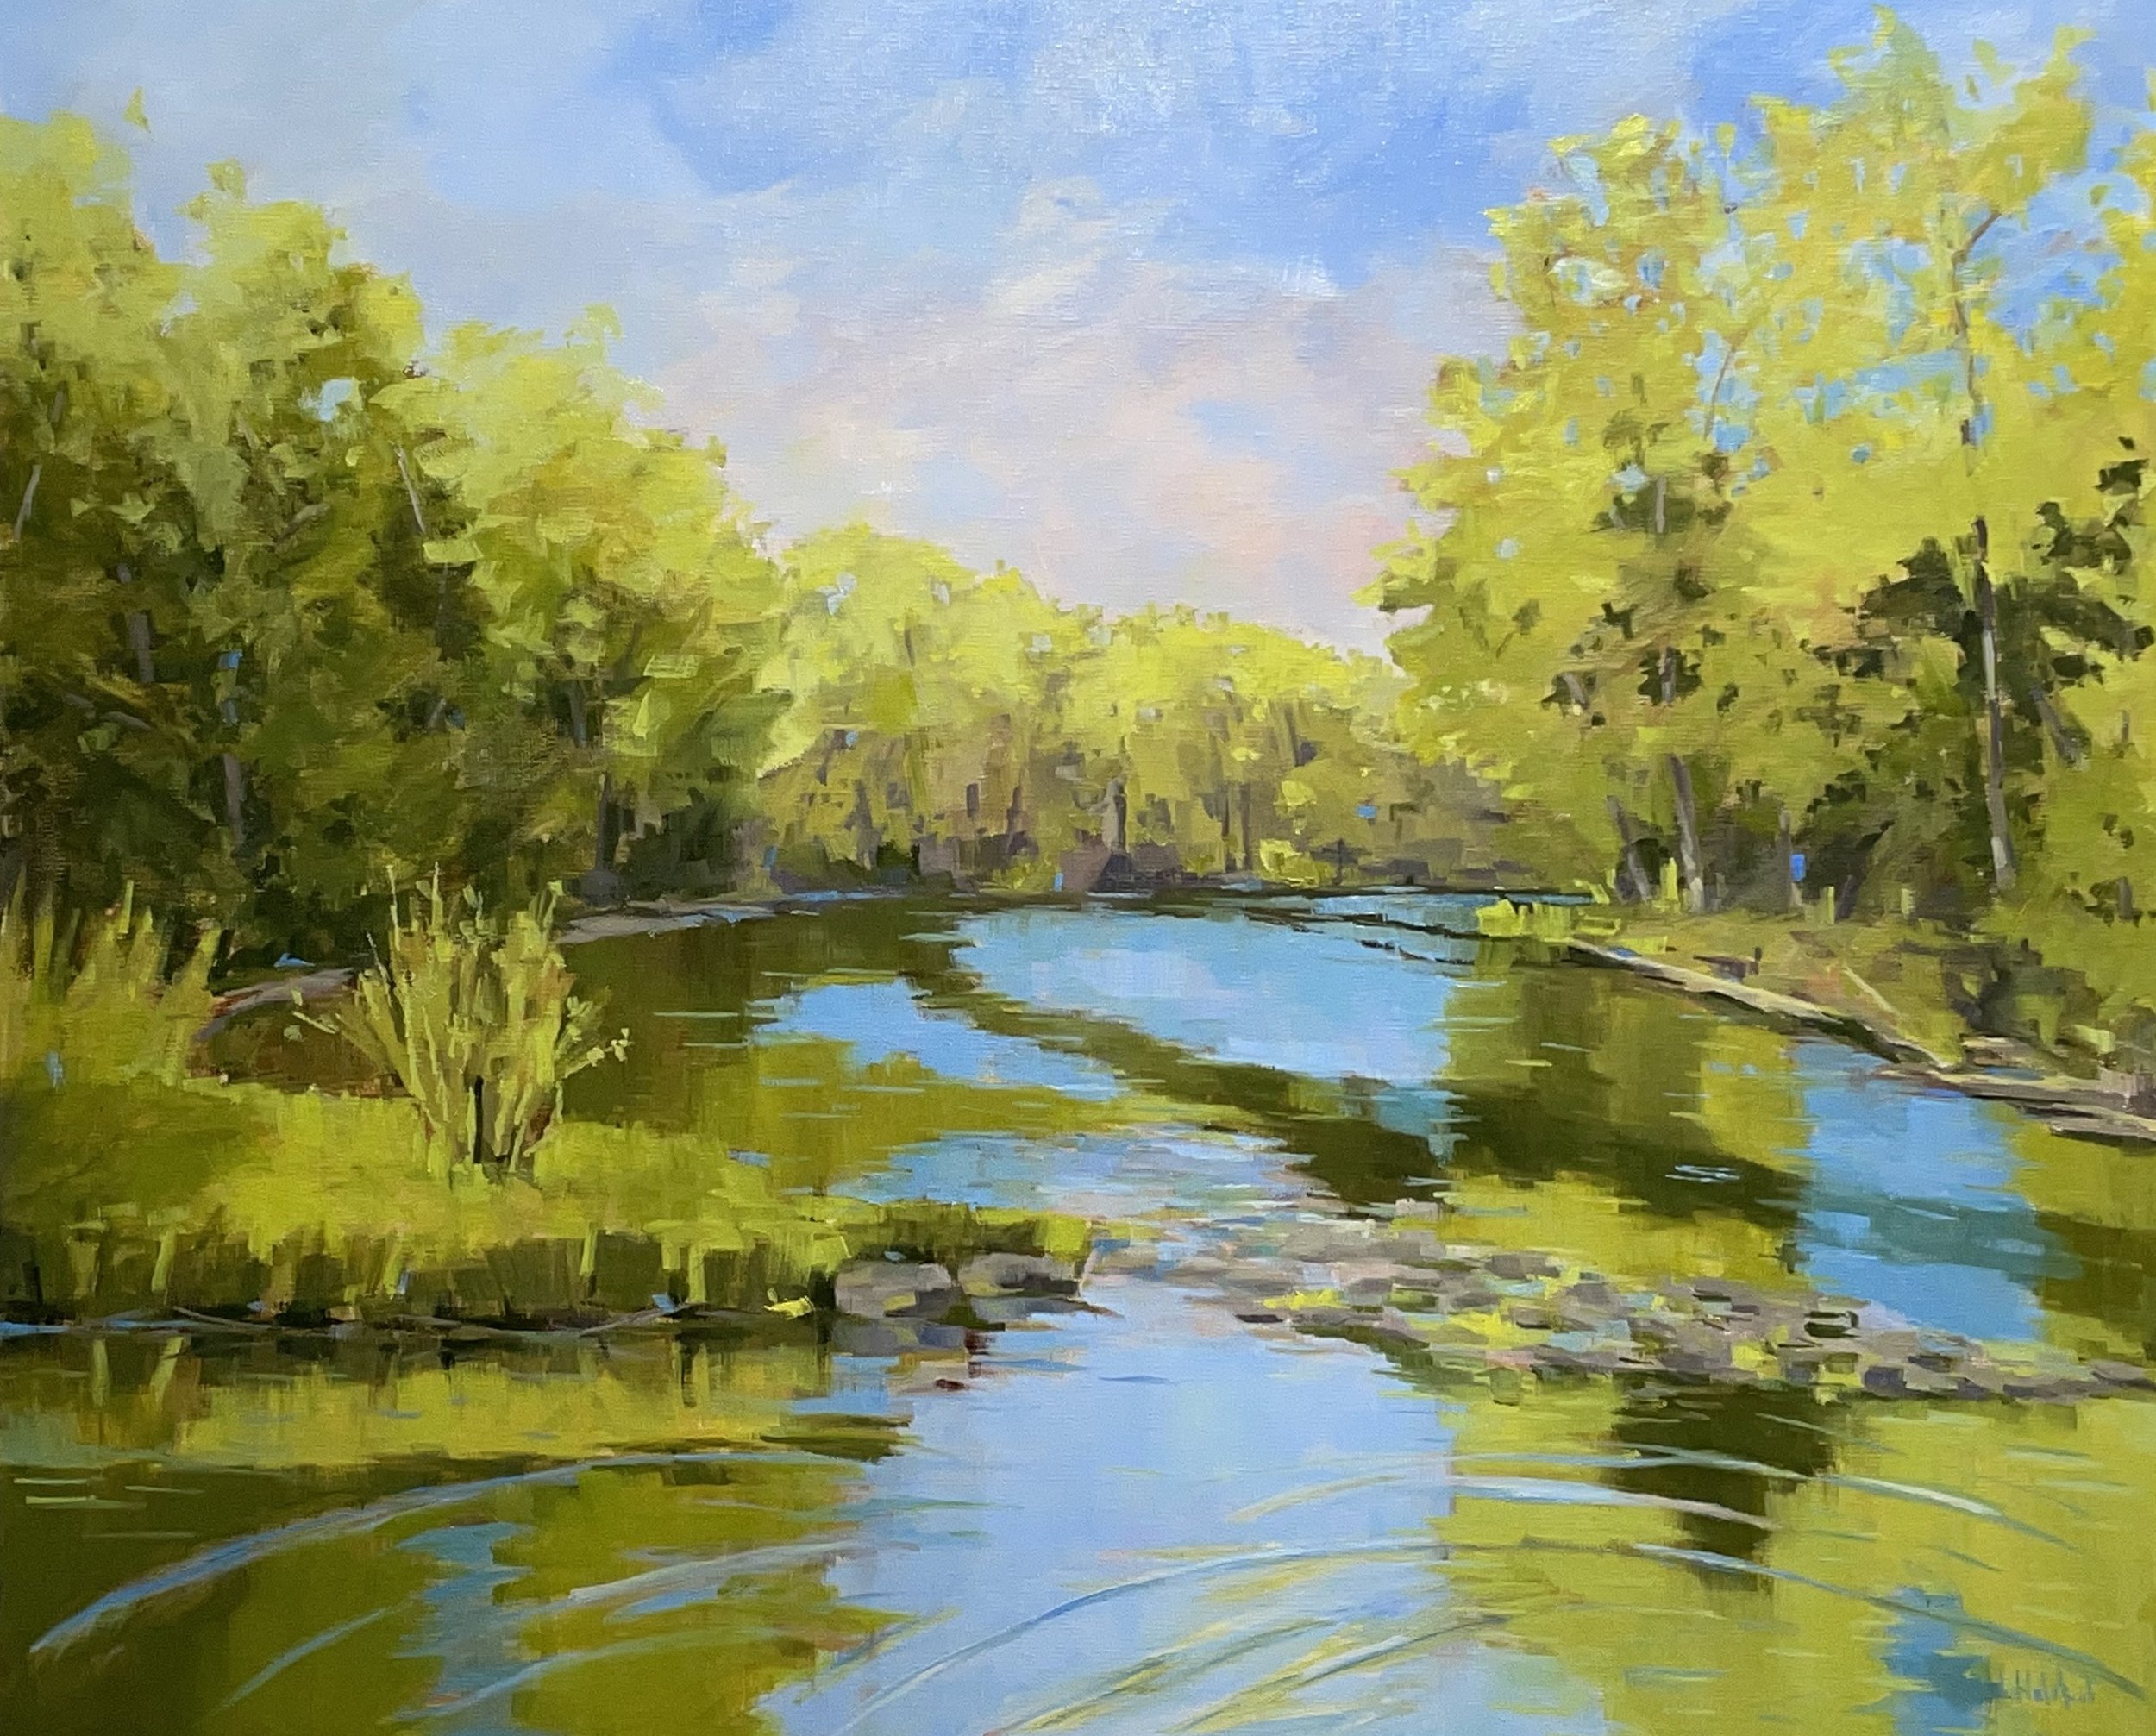 Late Spring on the River, oil on linen, 20 x 24